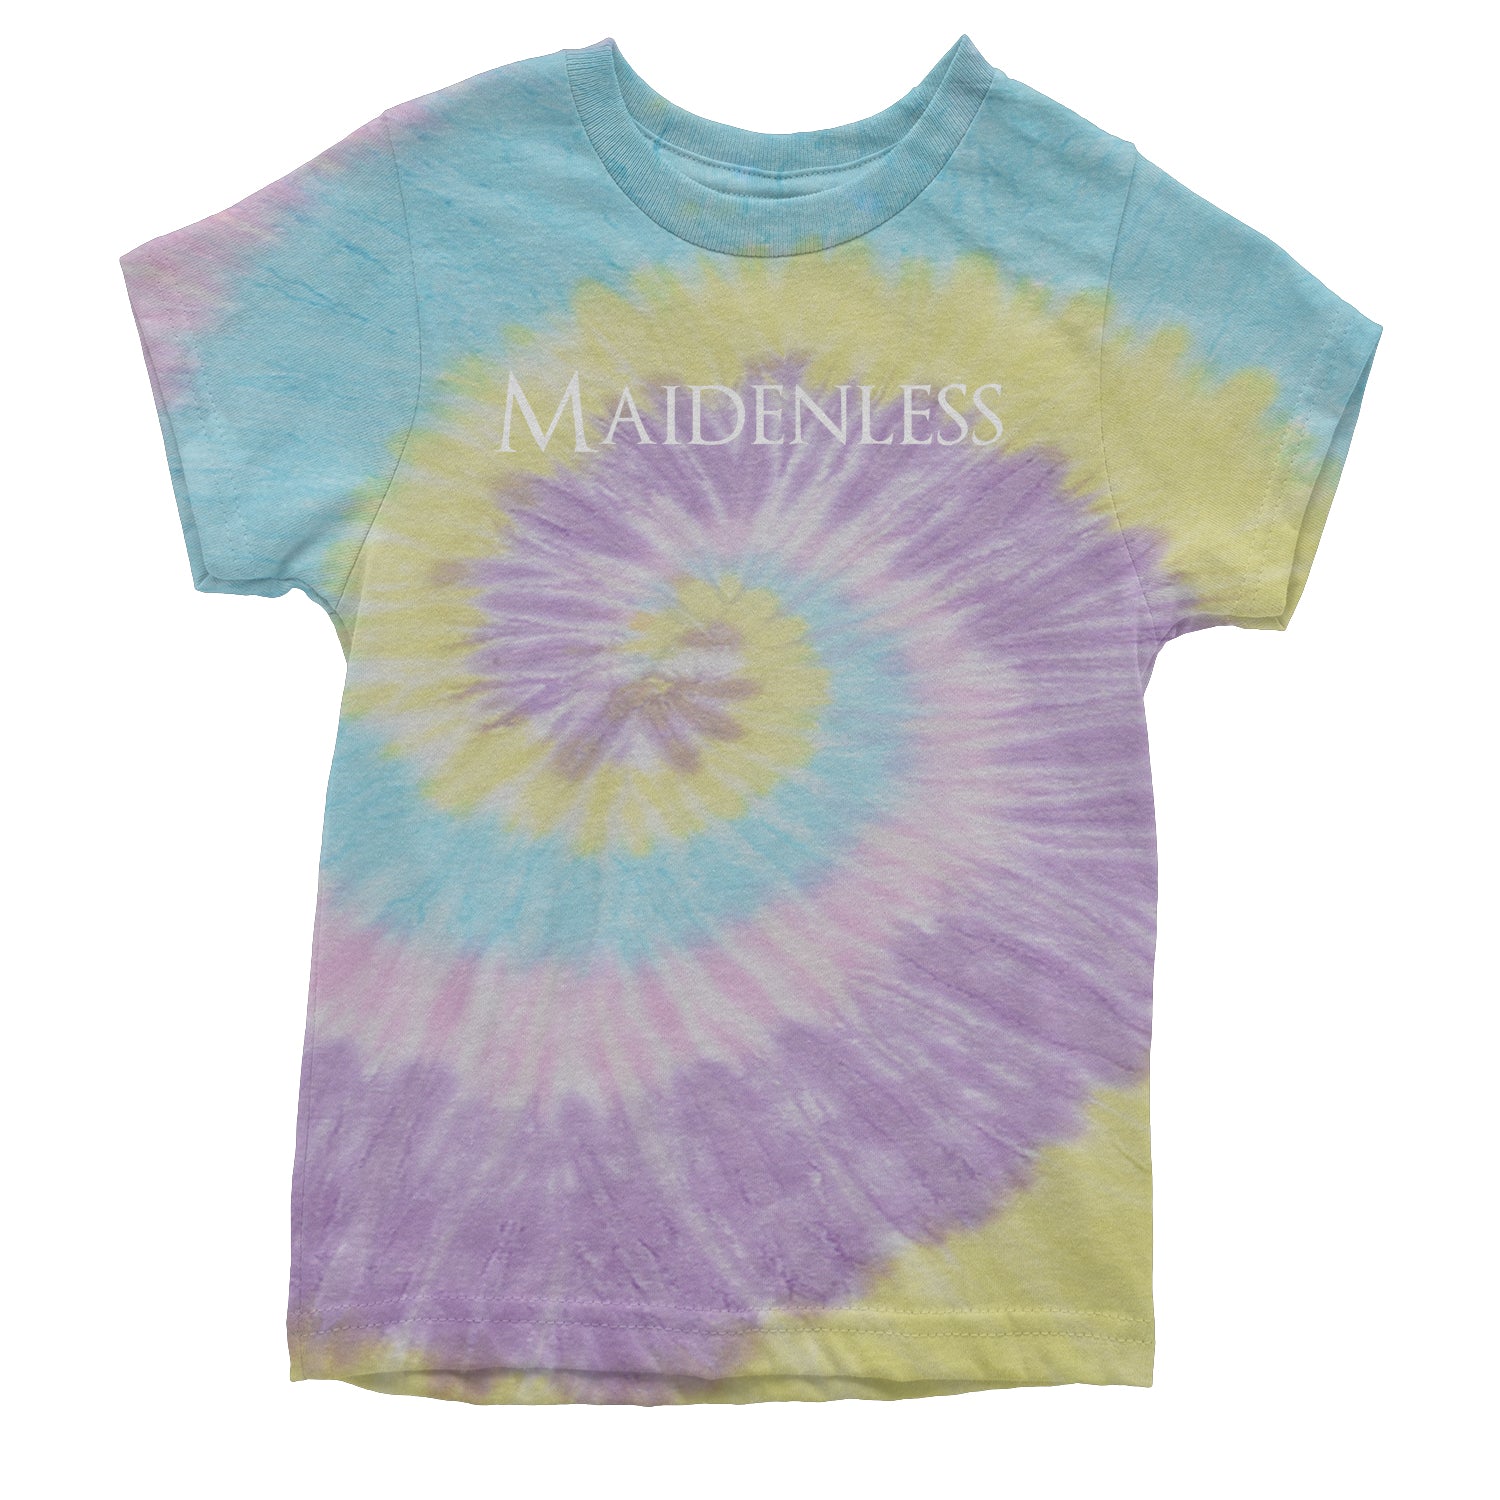 Maidenless Youth T-shirt elden, game, video by Expression Tees